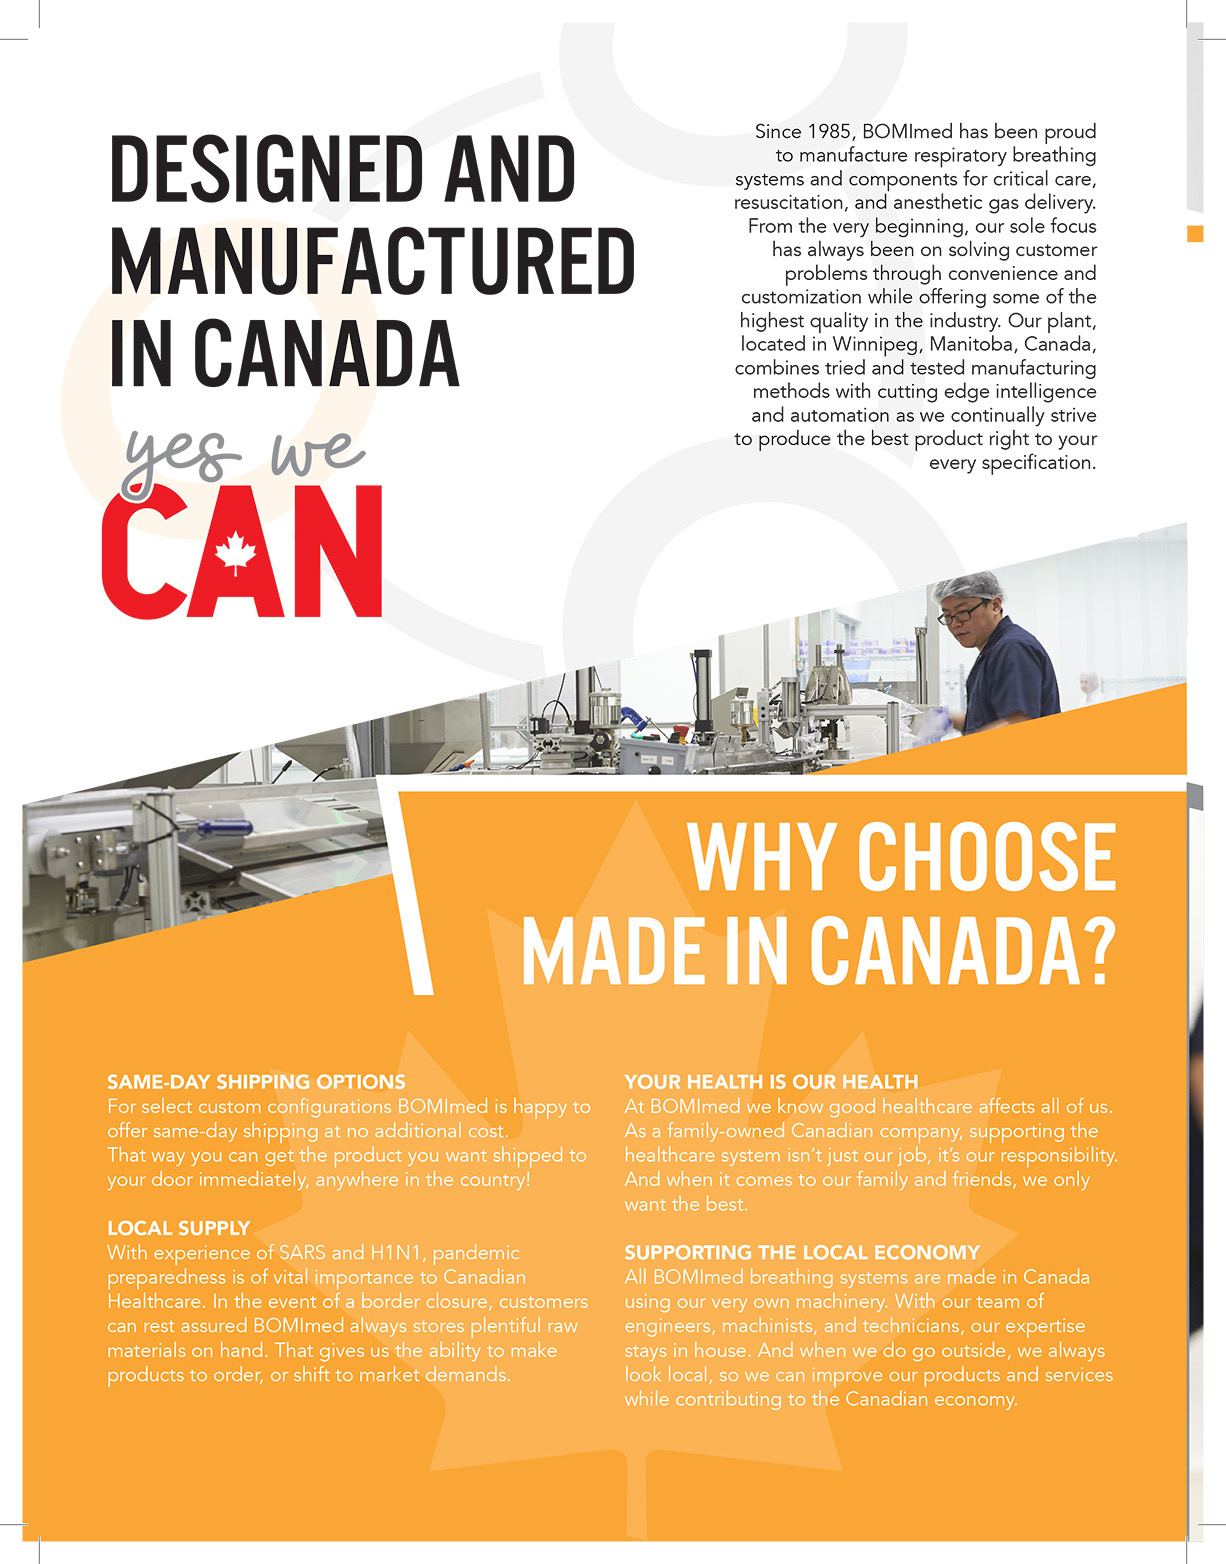 BOMImed Manufacturing Brochure - "Designed and Manufactured in Canada"